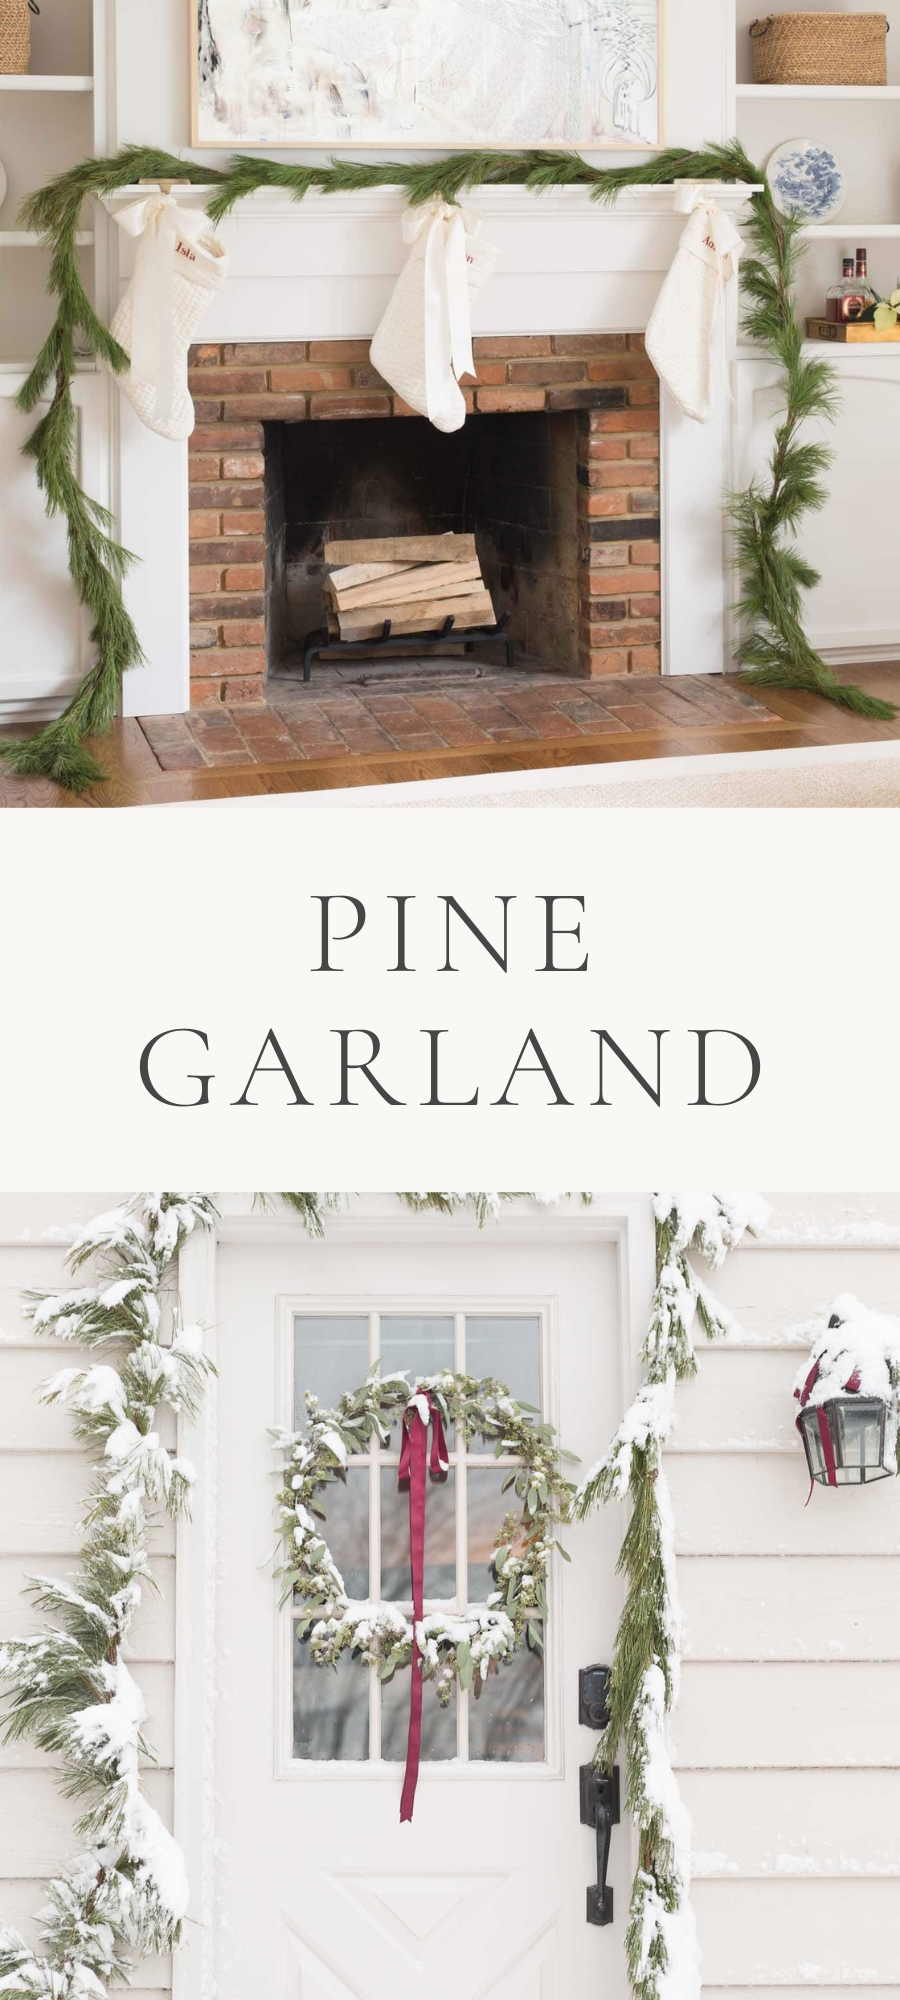 images of pine garlands on white dutch door and on fireplace next to Christmas decorations and caption in the middle saying "pine garland"